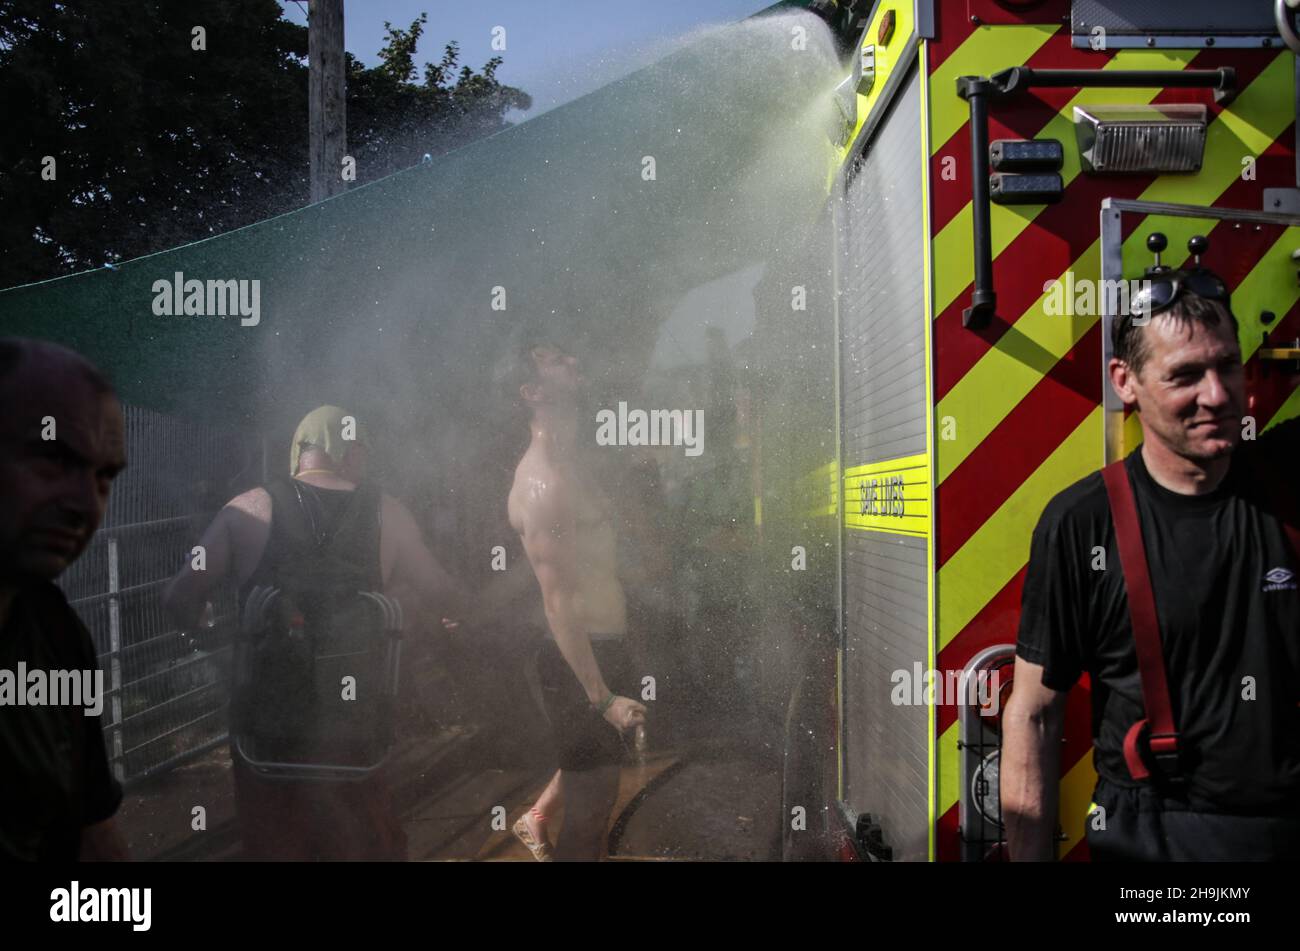 A man is doused by Shepton Mallet firemen on a very hot Day 1 (Wednesday) of the 2017 Glastonbury Festival at Worthy Farm in Somerset. Photo date: Wednesday, June 21, 2017. Photo credit should read: Richard Gray/EMPICS Entertainment Stock Photo